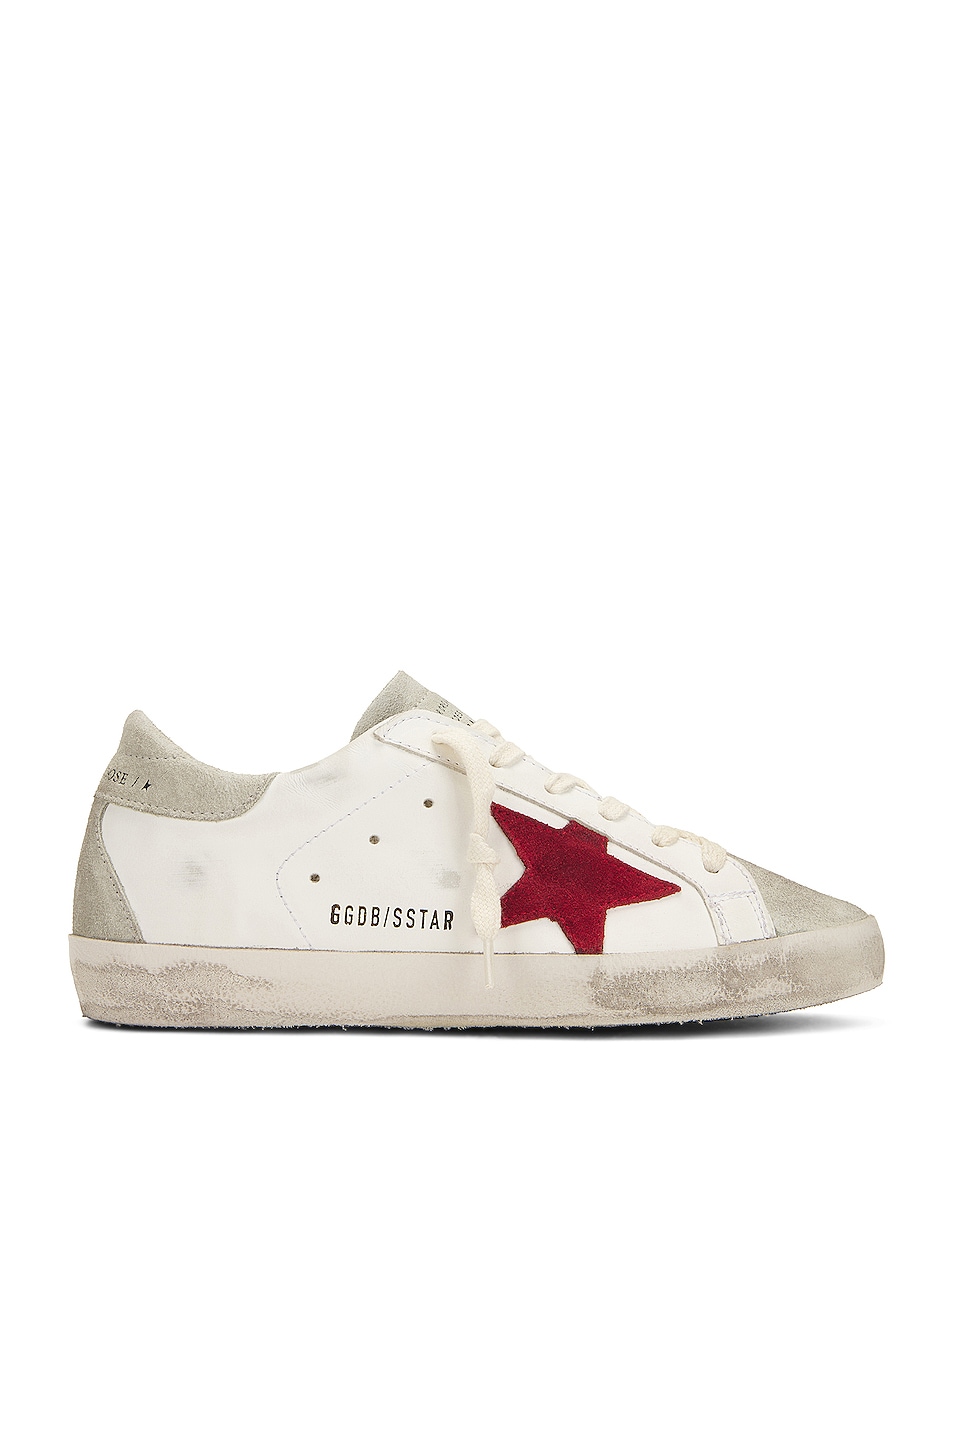 Image 1 of Golden Goose Superstar Sneaker in White, Ice, & Red